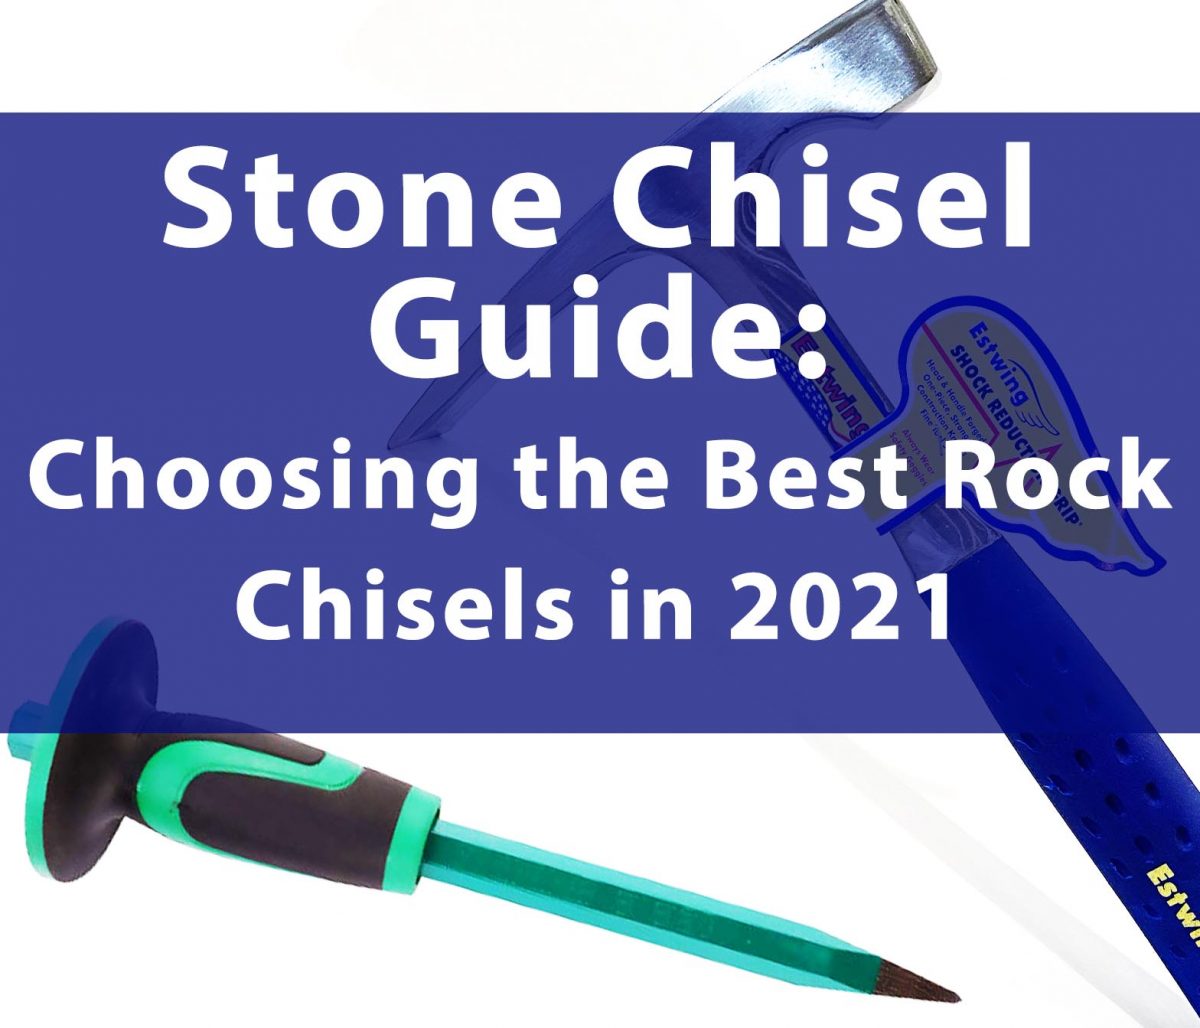 Stone Chisel Guide: Choosing the Best Rock Chisels in 2021